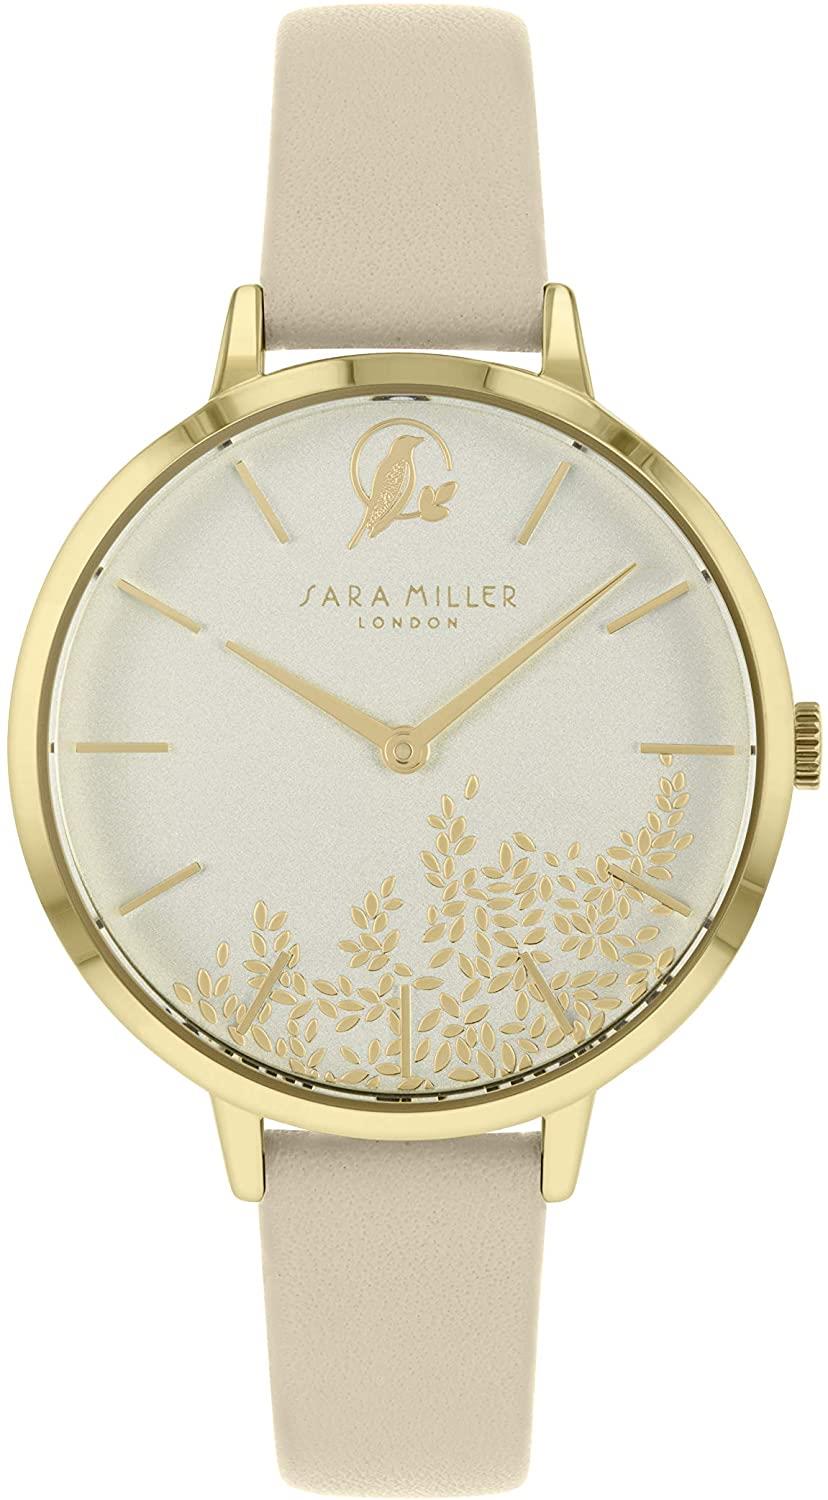 Sara Miller Leaf Collection Gold Plated Beige Leather Strap Watch SA2028